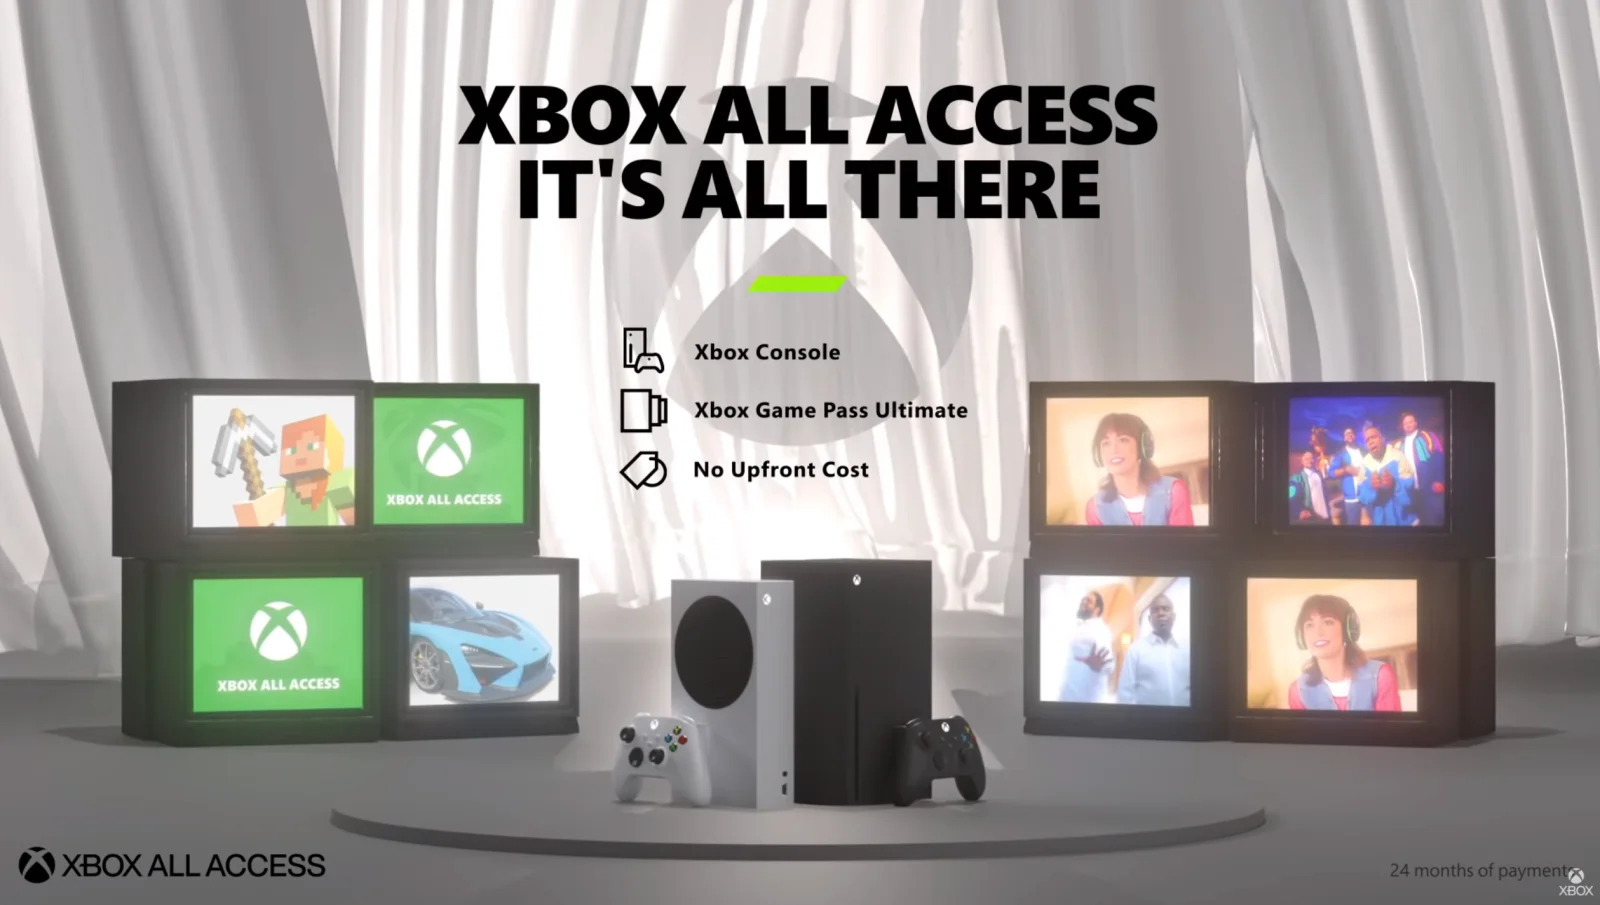 Xbox发布全新复古90年代广告曲：It's All There